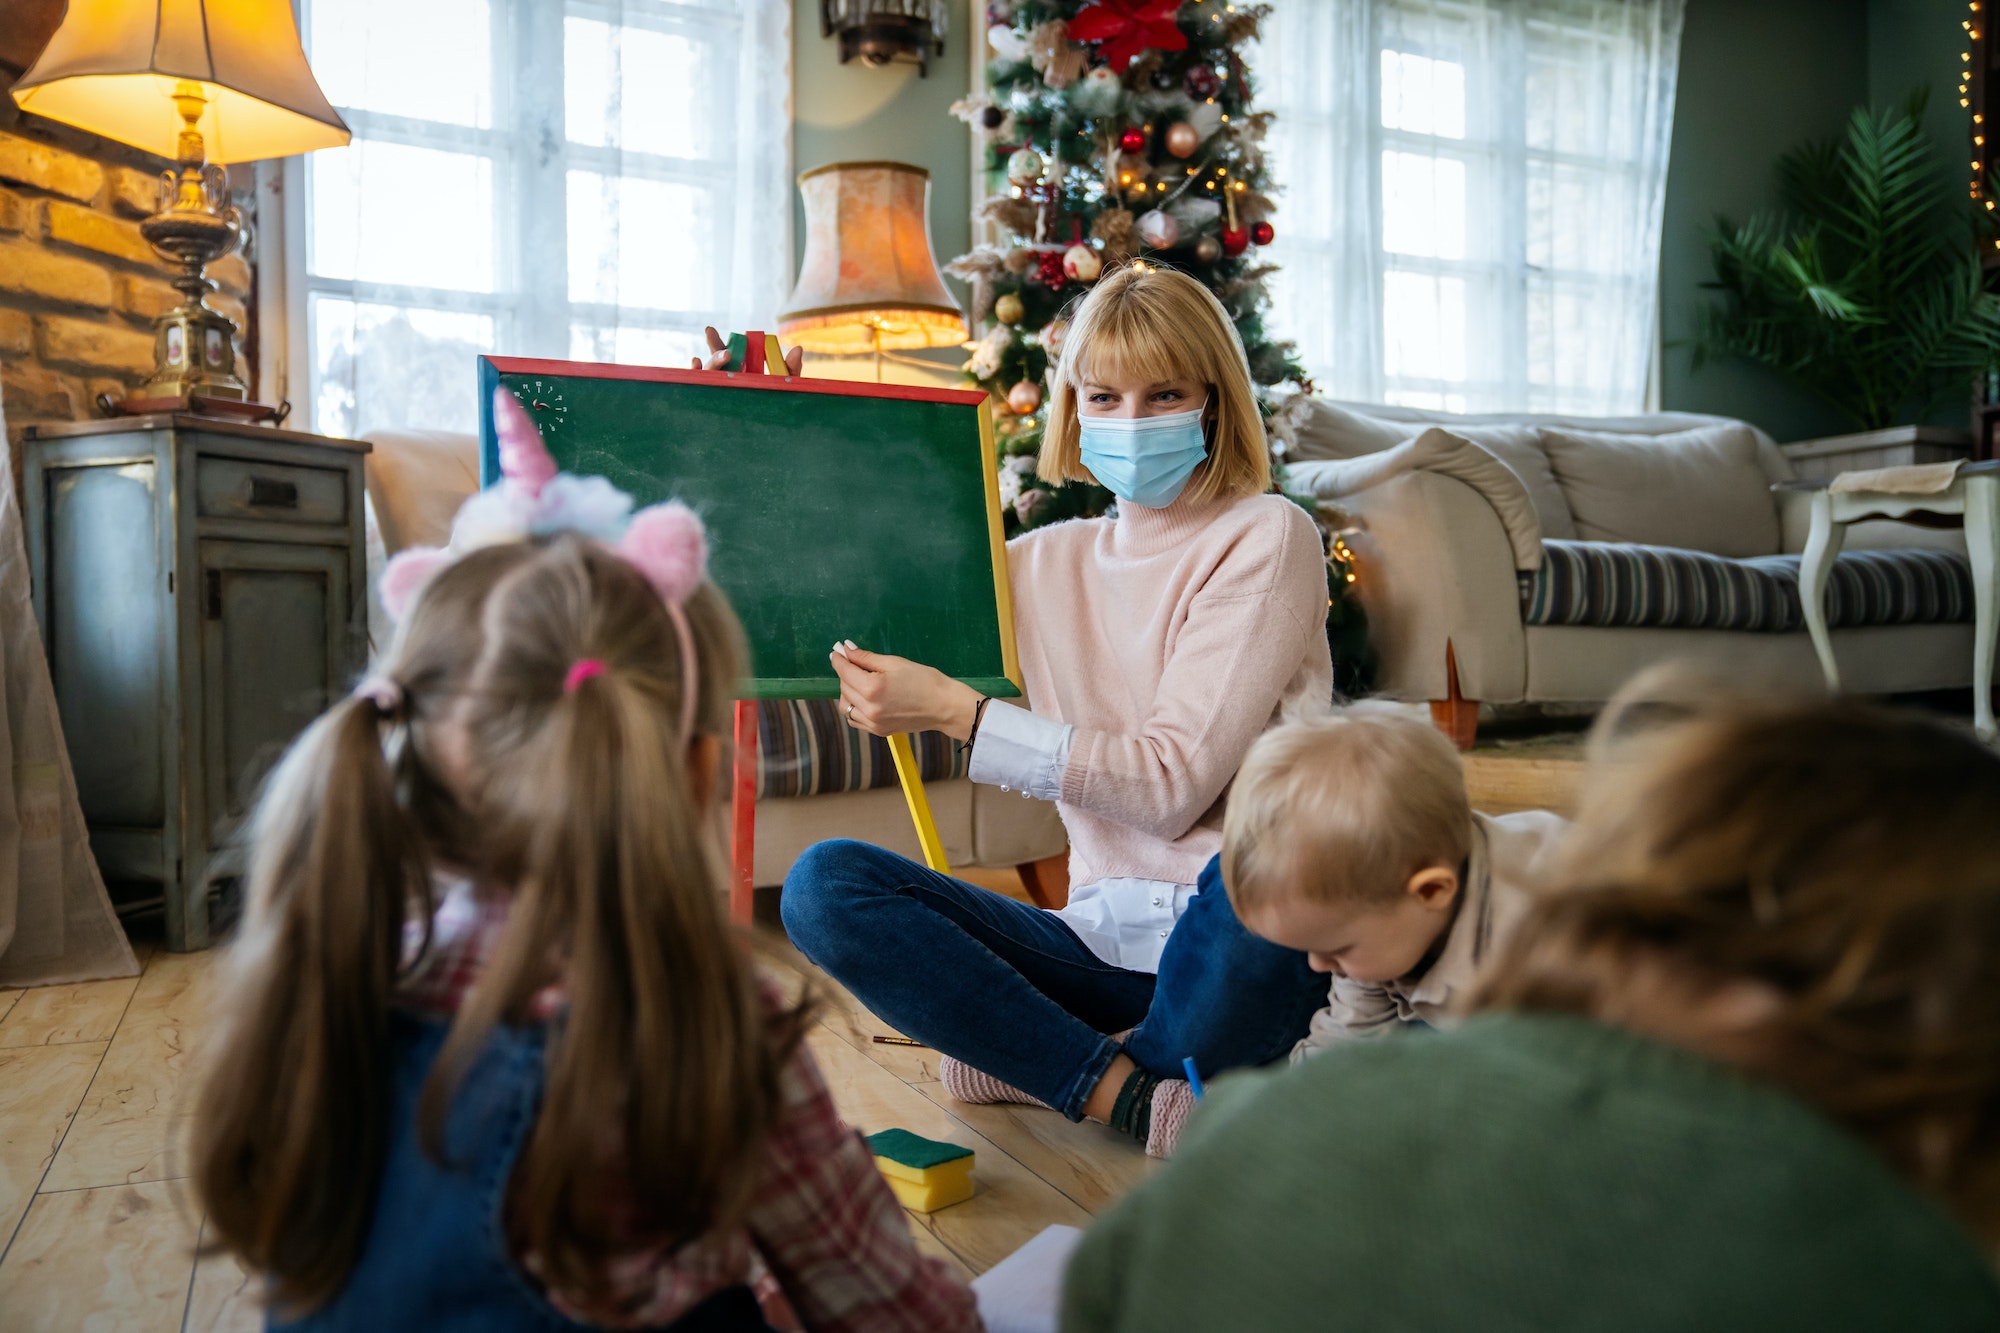 Childminder with mask and children playing together. Education, coronavirus concept